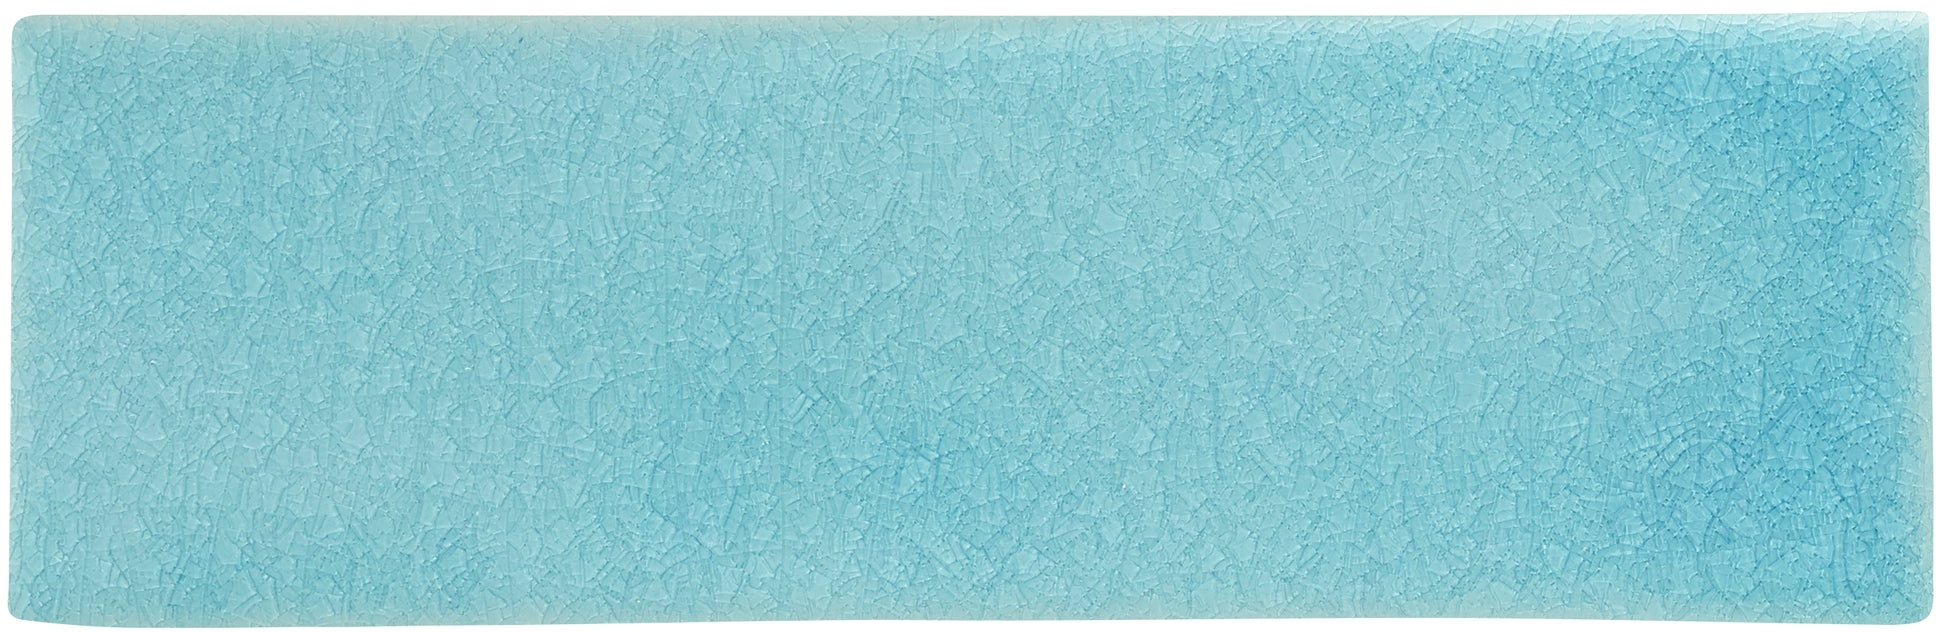 2.6x8 Crackled Turquoise white body ceramic wall tile - Industry Tile